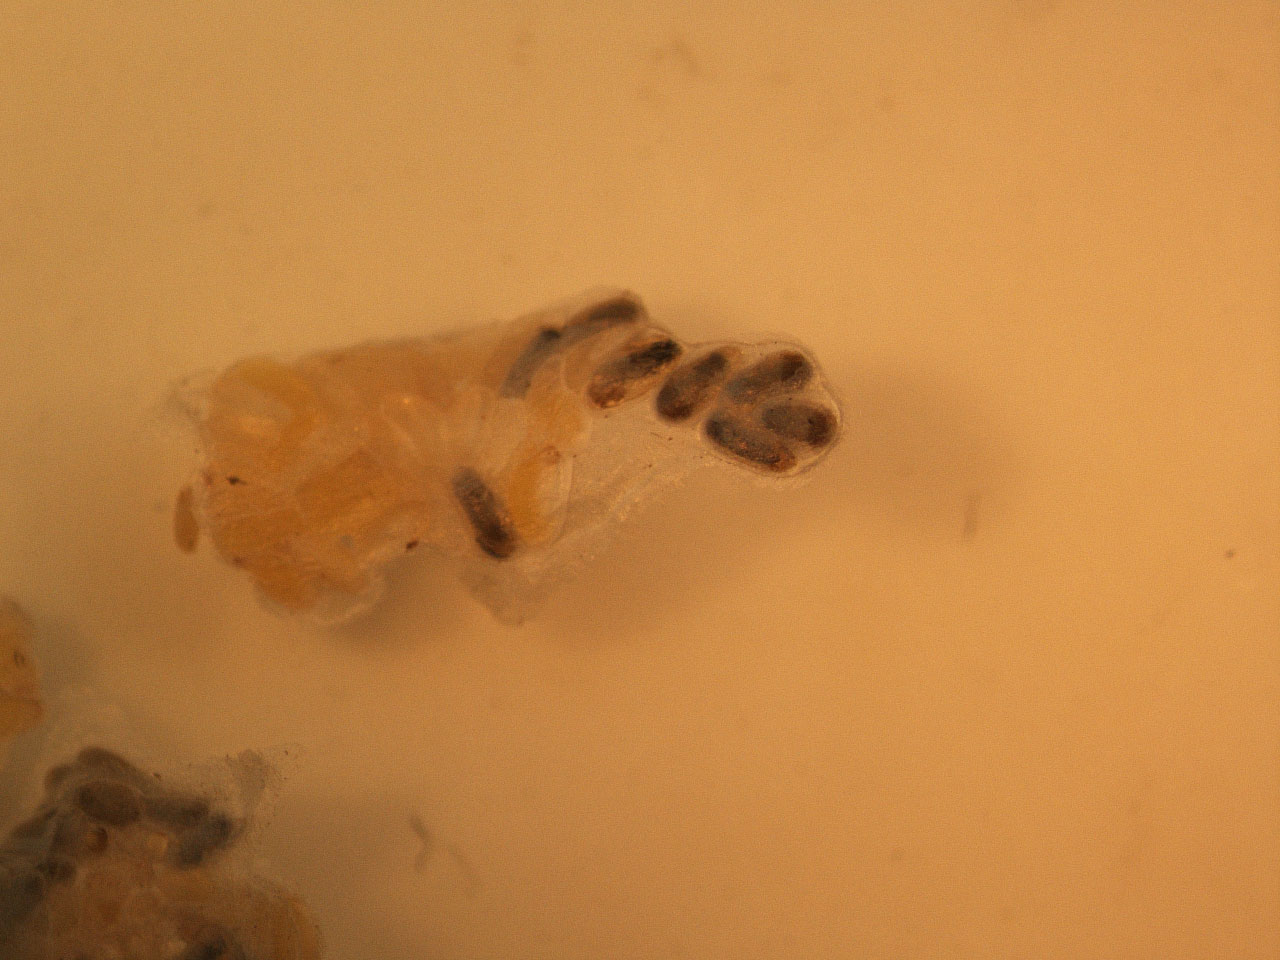 Figure 7. Fuller’s rose weevil eggs parasitised by Fidiobia citri. Photo: Jianhua Mo, NSW DPI.